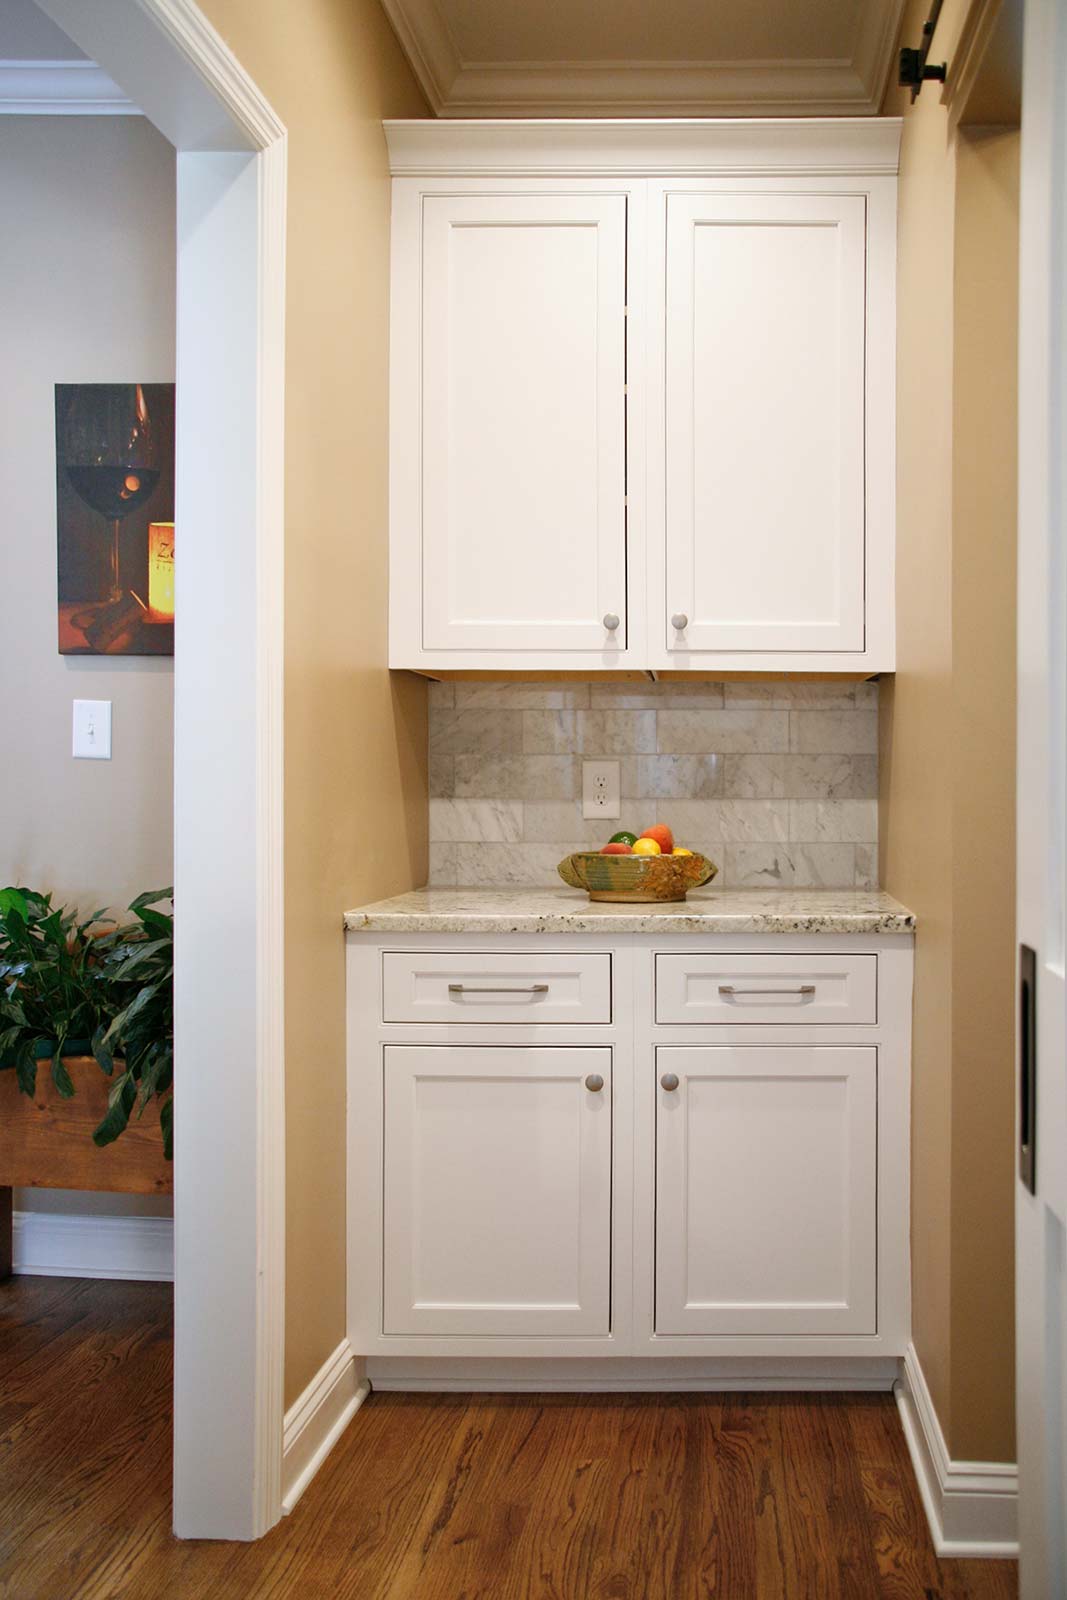 Pantry replaced with built-in cabinets